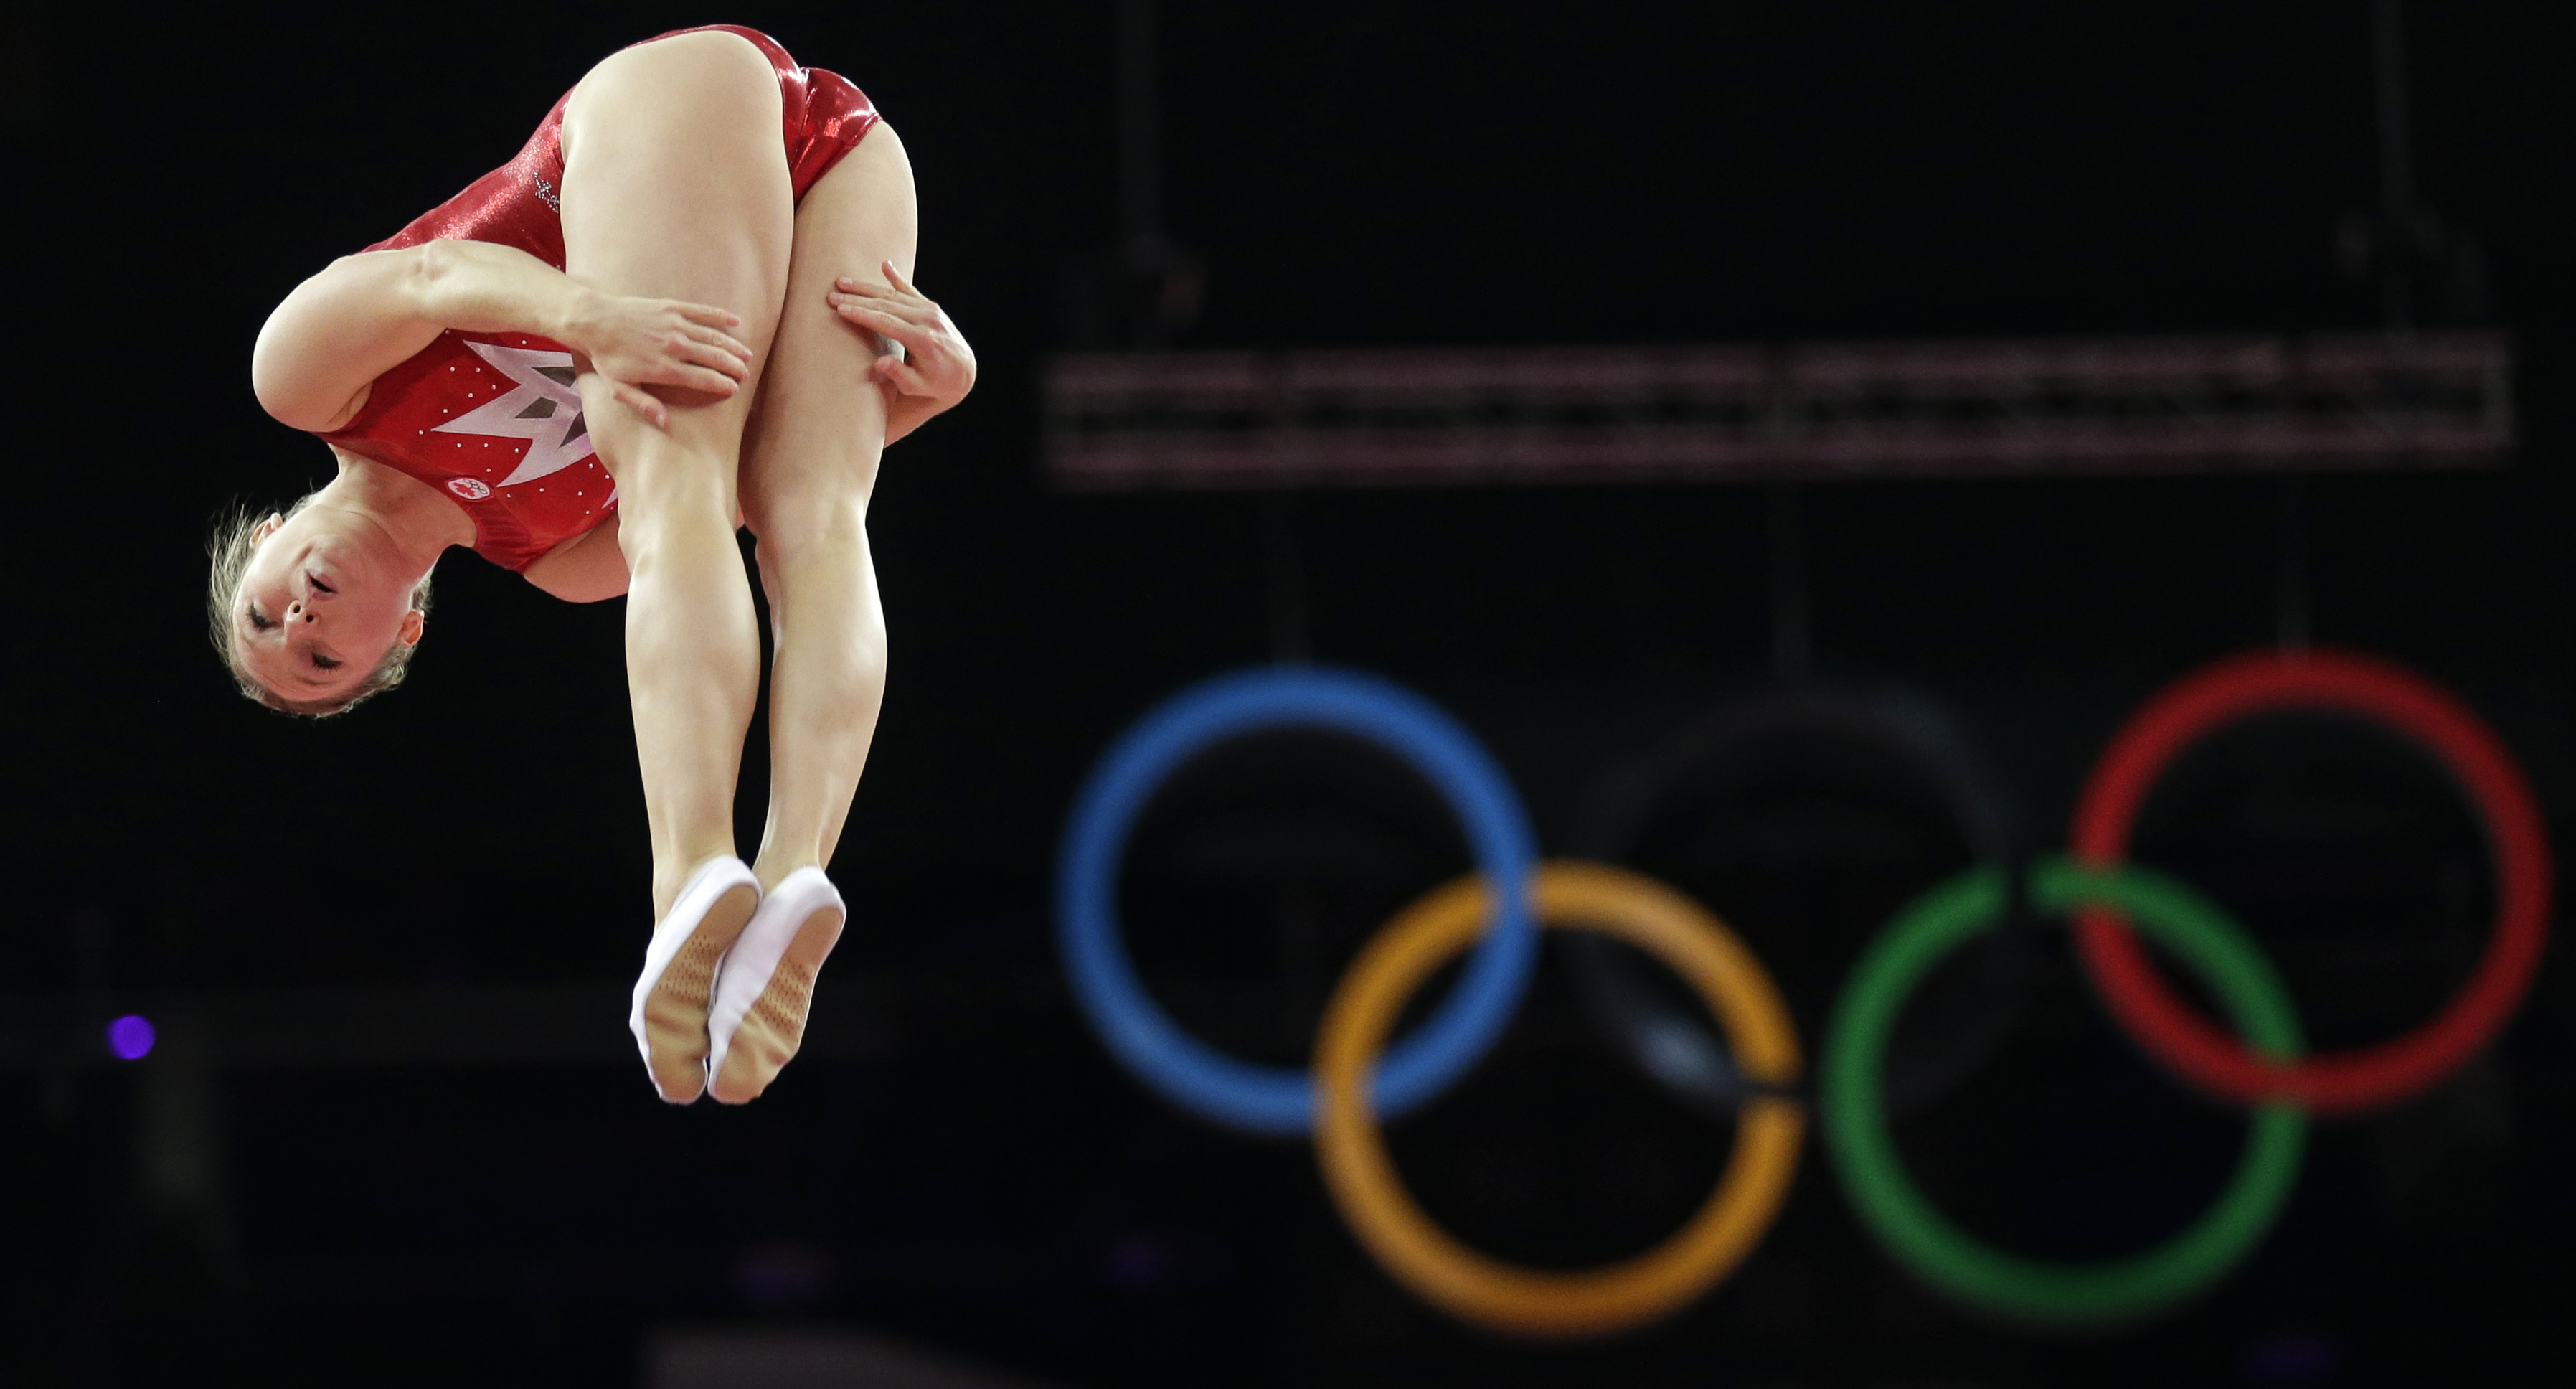 Trampoline gymnastics: Acrobatic performance in the air, An official Olympic sport. 3600x1940 HD Wallpaper.